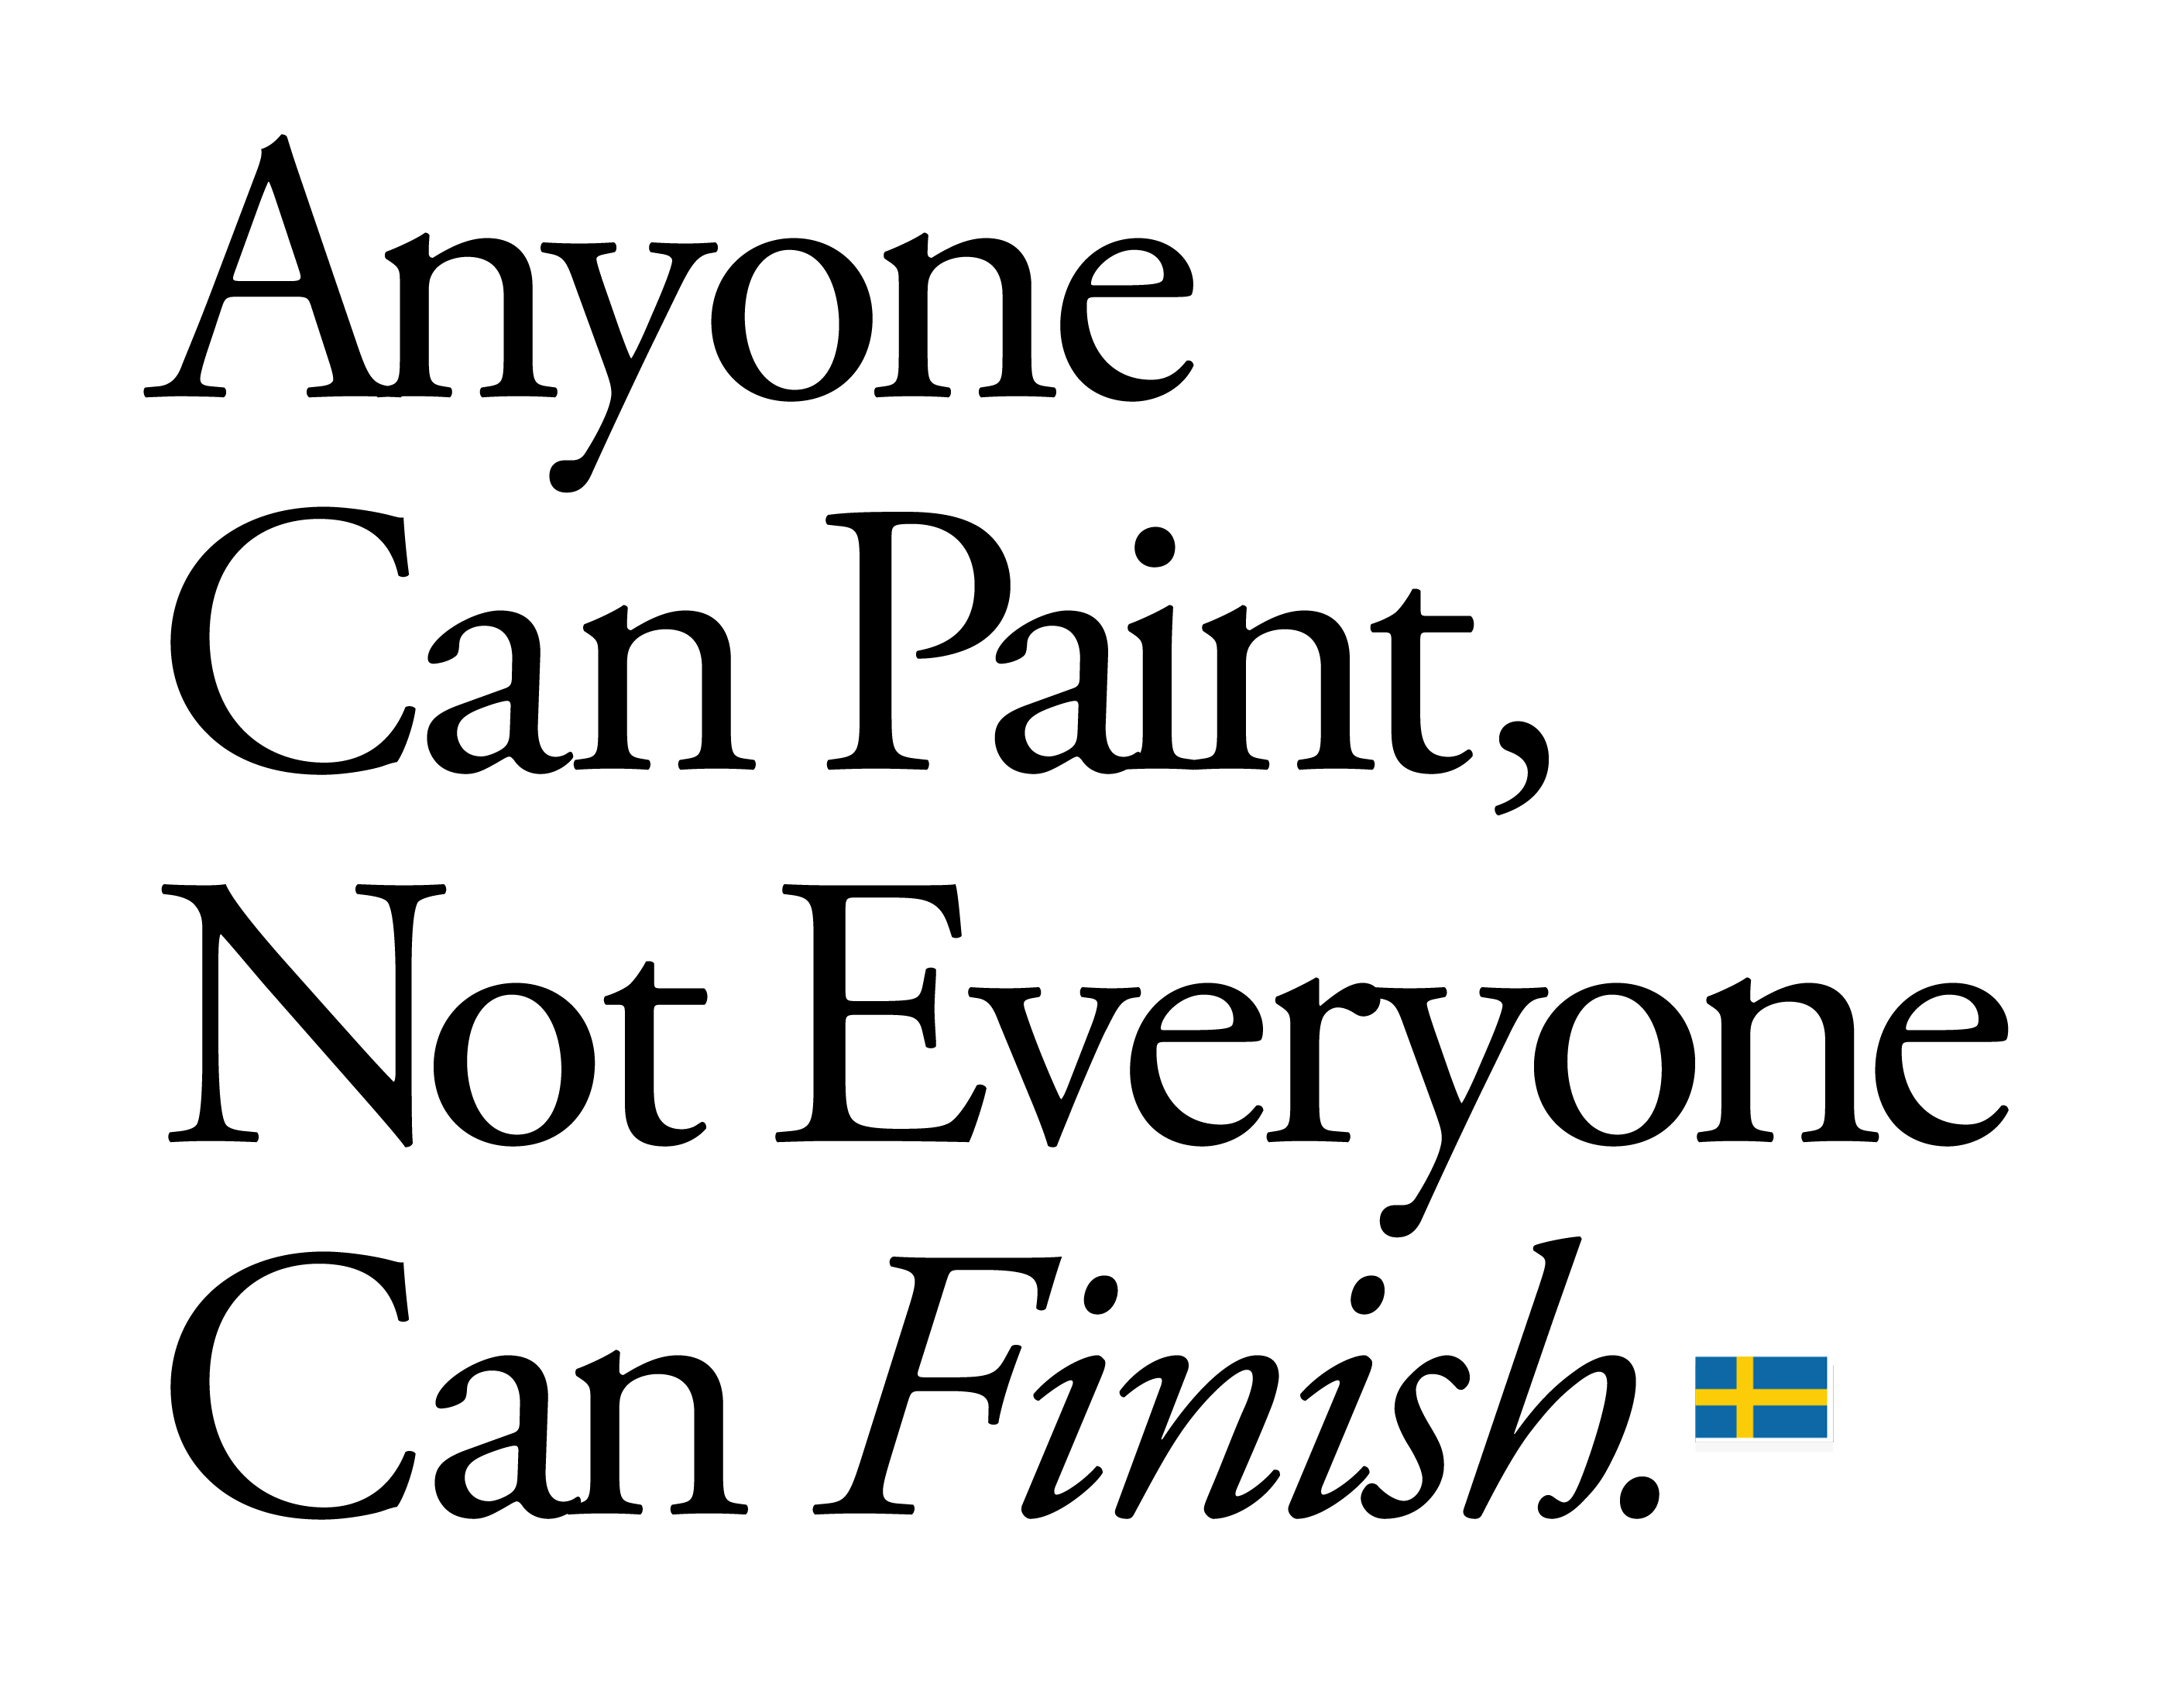 Anyone Can Paint, Not Everyone Can Finish.